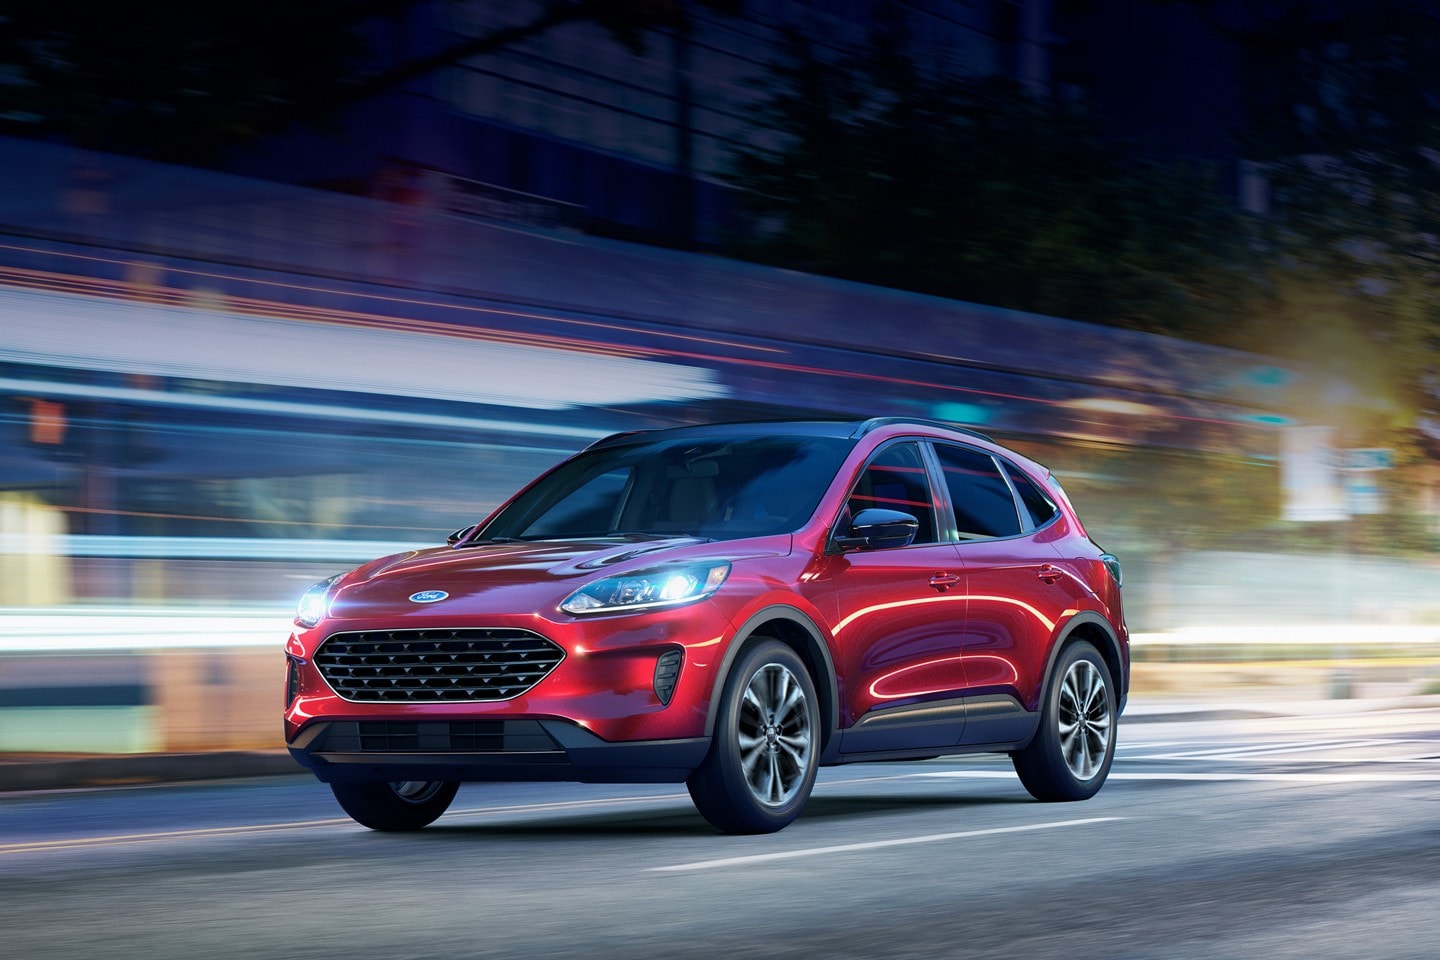 A 2021 Ford Escape on a city street at night